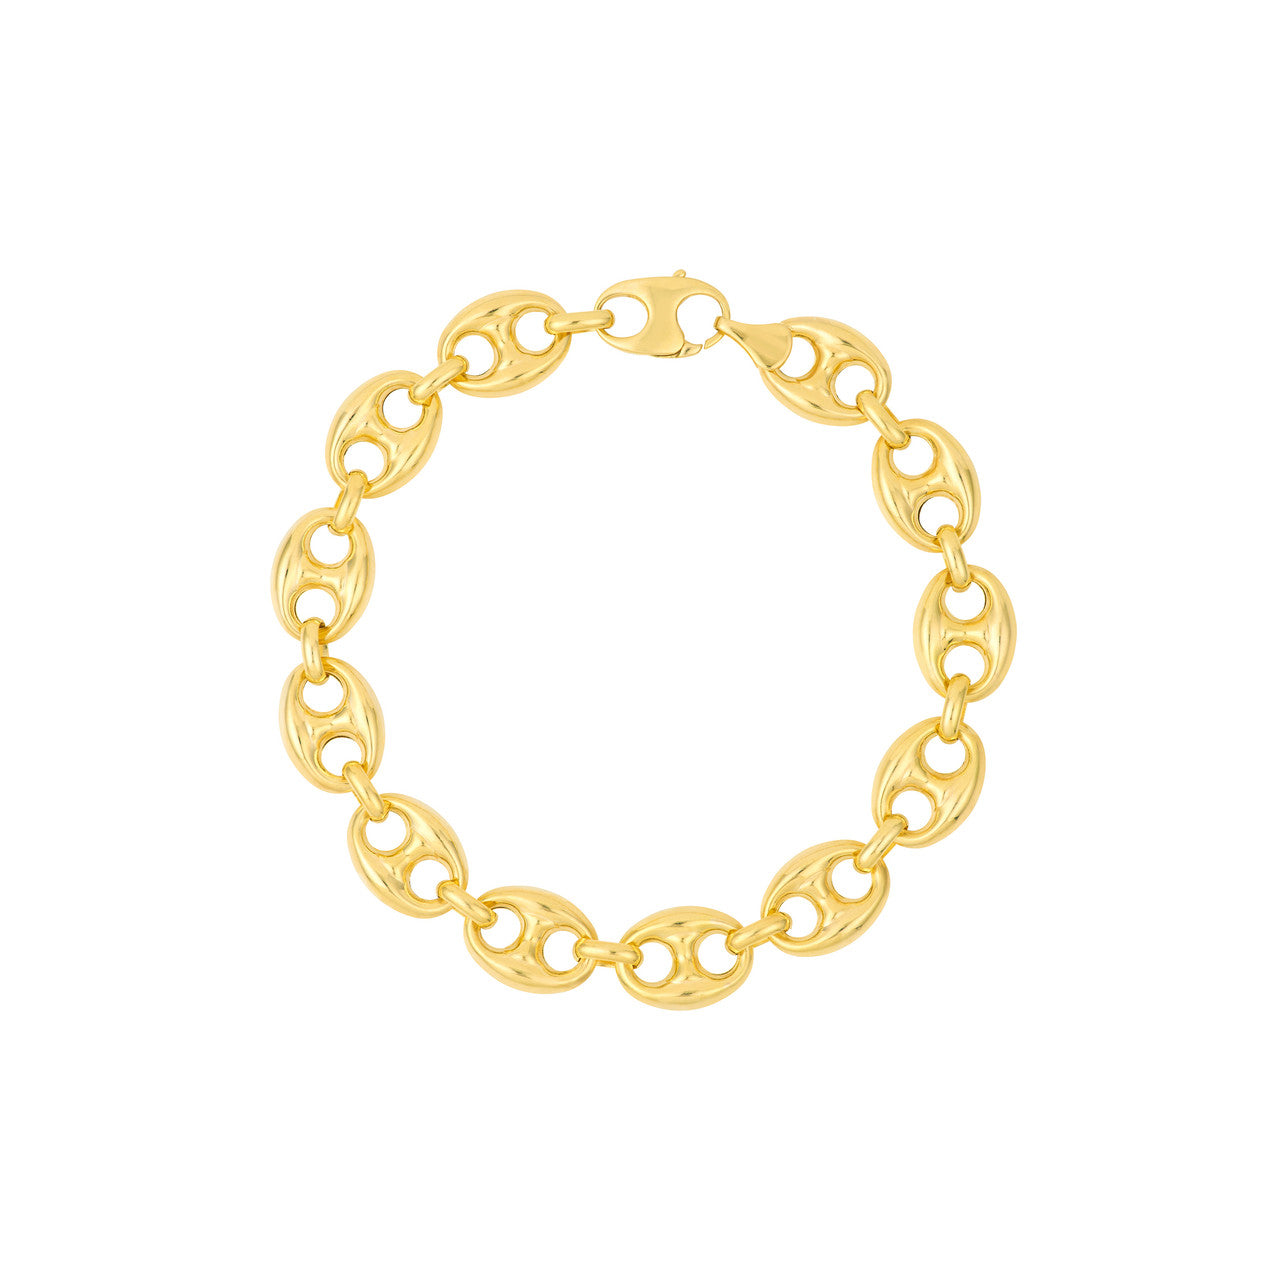 14K Yellow Gold 10mm Puff Mariner Bracelet Anklet Choker Necklace Pendant Chain